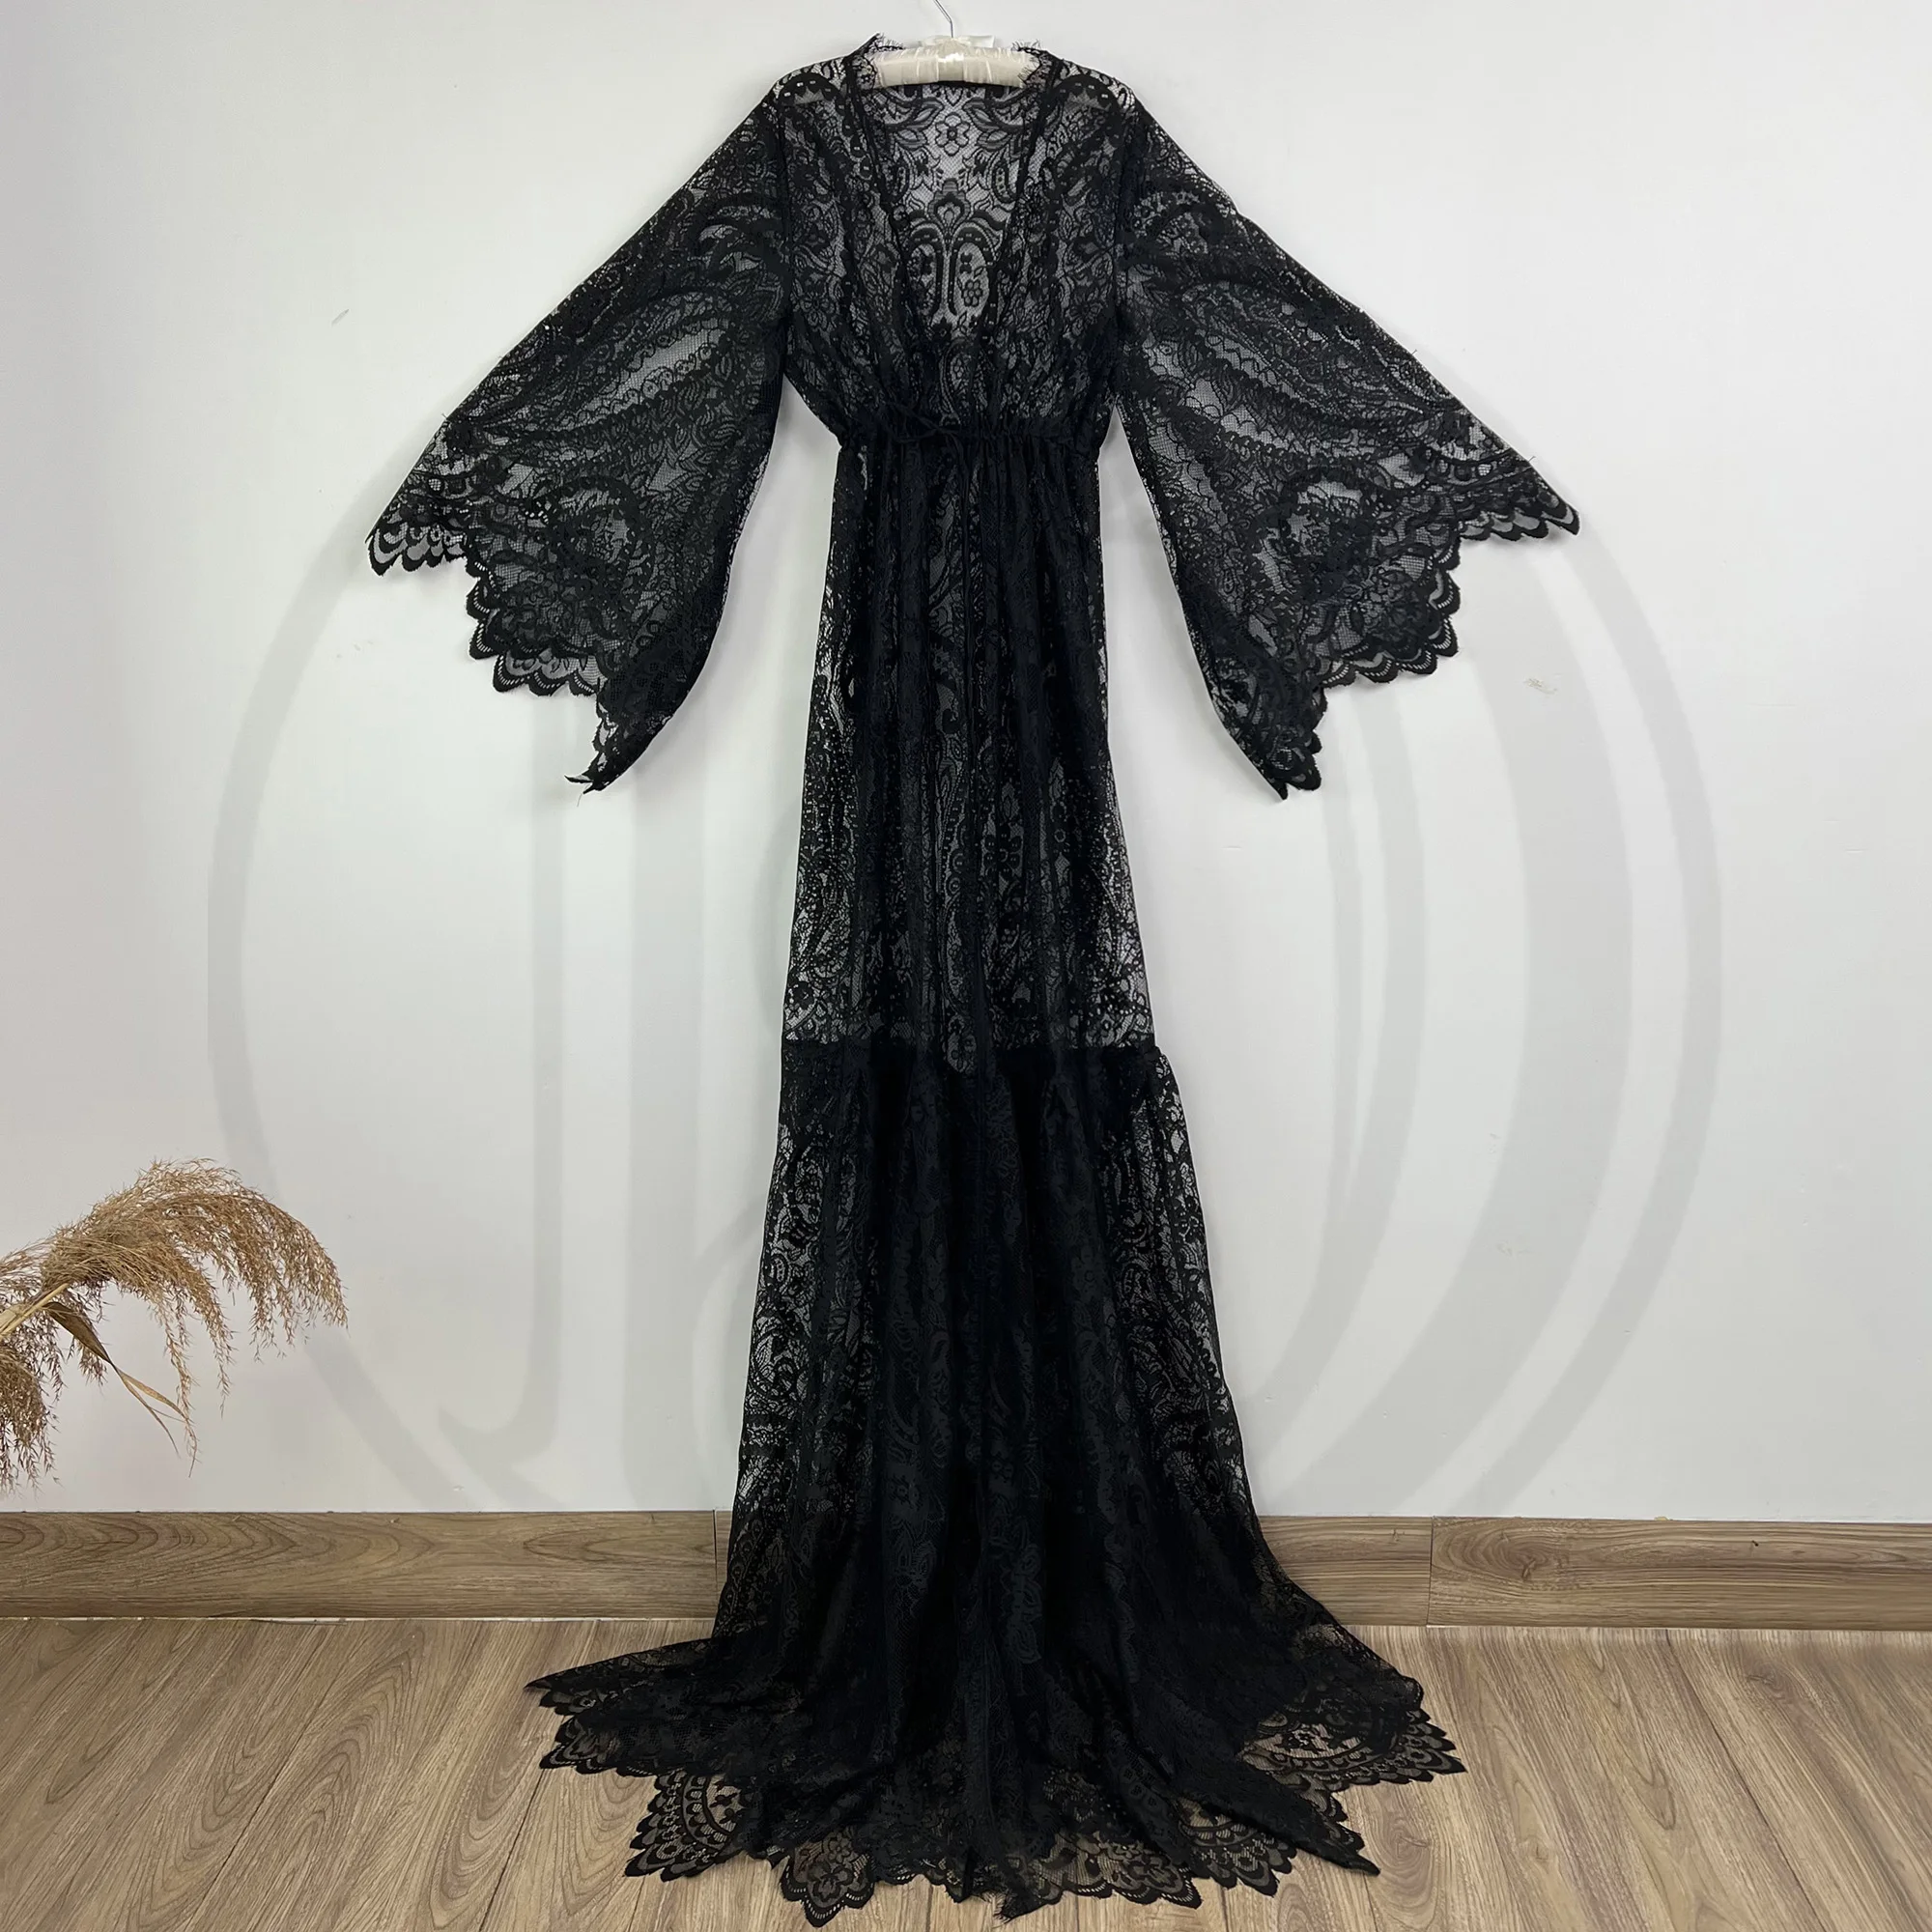 Photo Shoot Props Maternity Dress Boho Pregnant Floral Lace Gown Maxi Robe for Woman Photography Accessories Baby Shower Gift enlarge